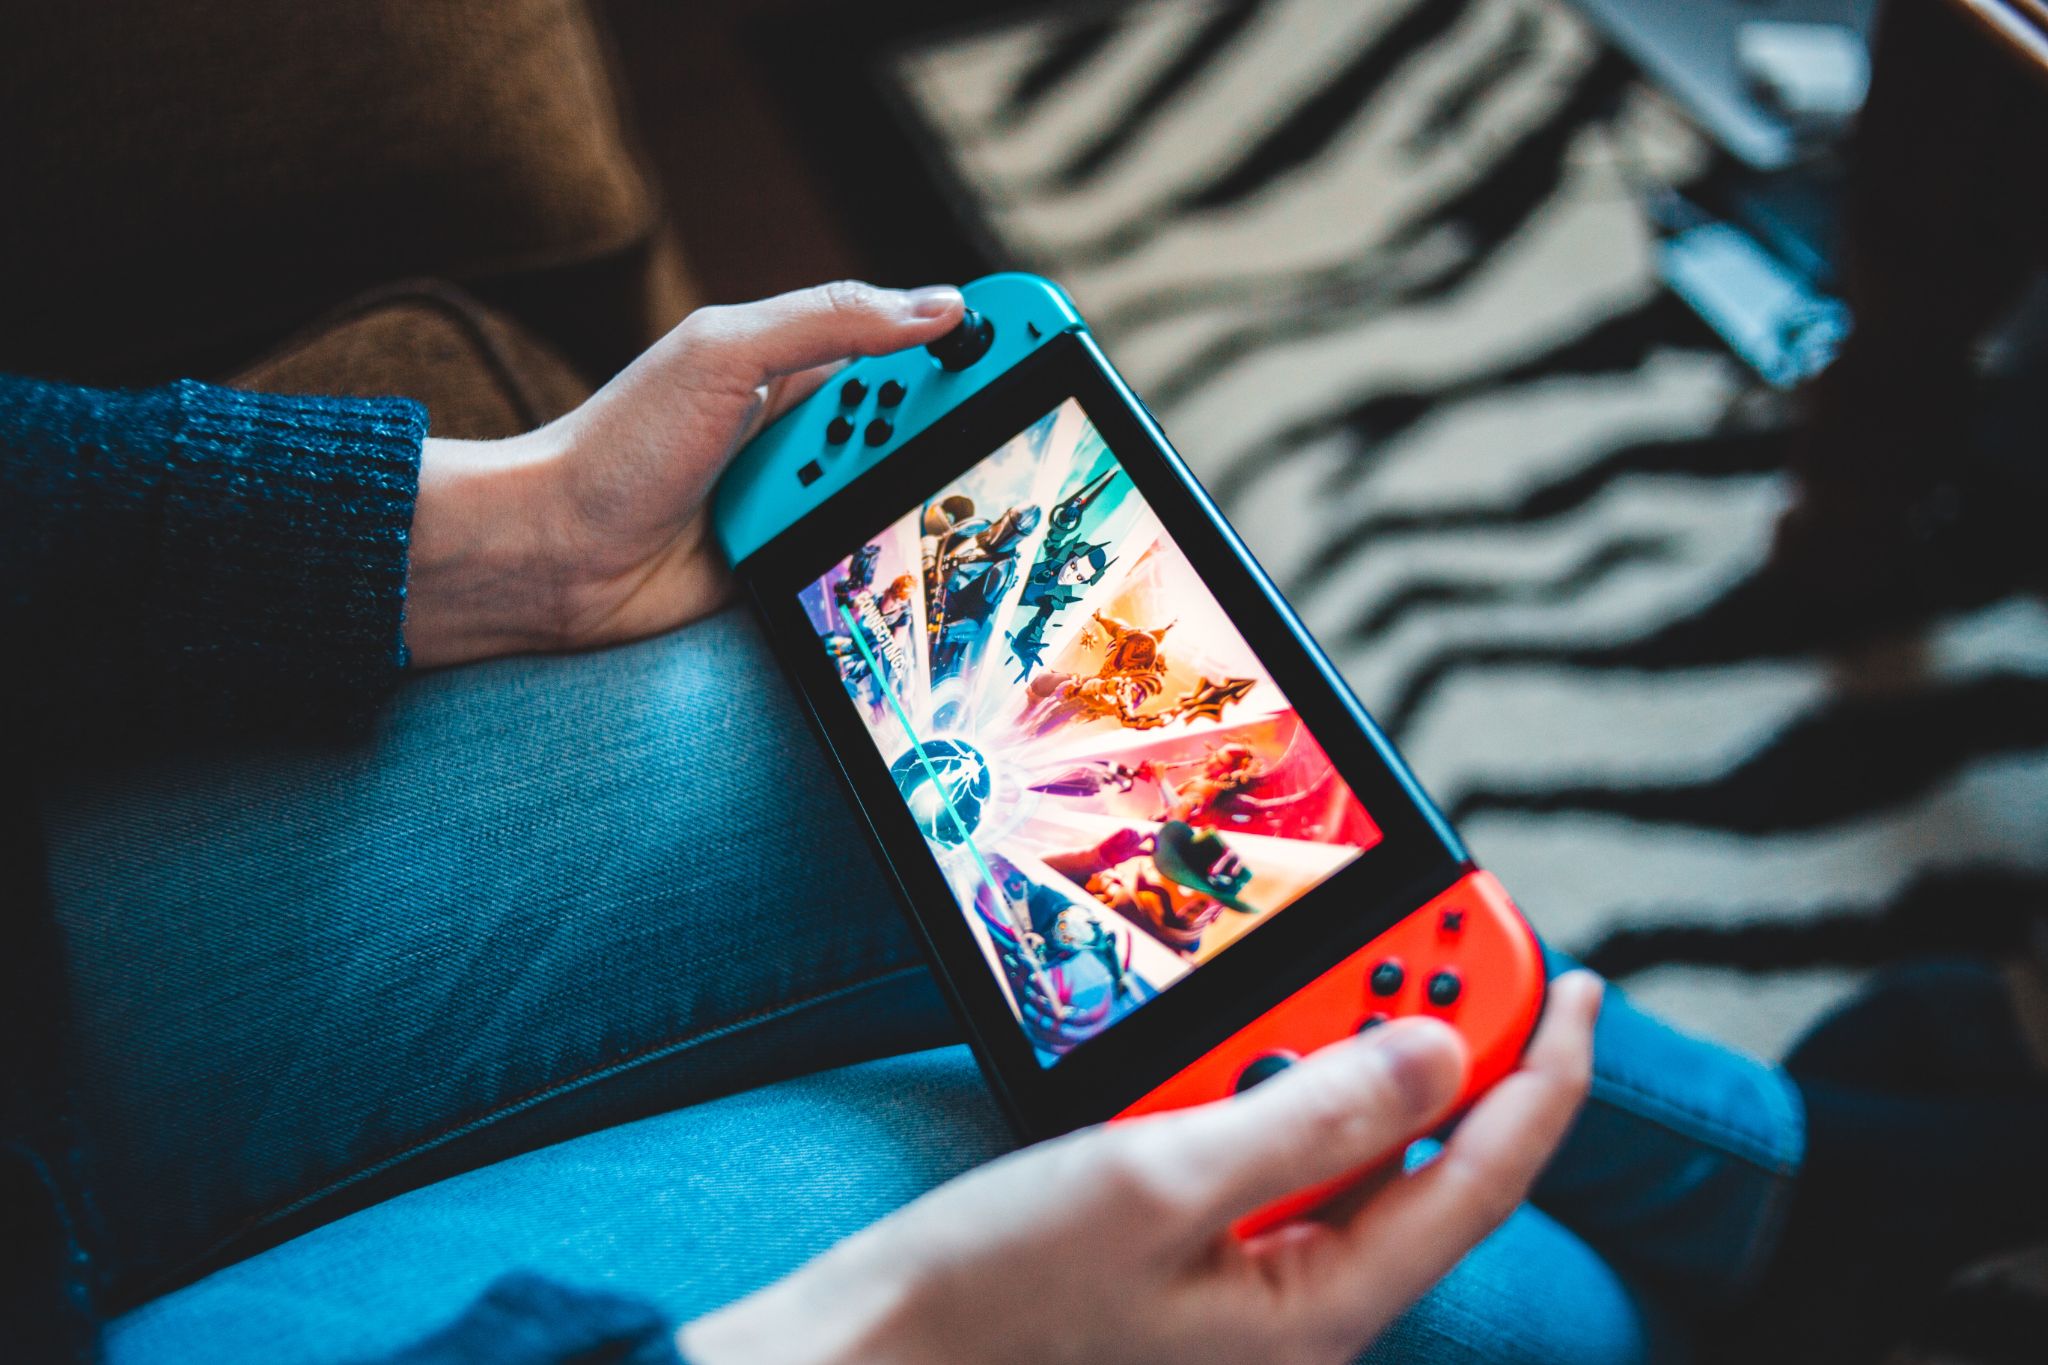 A woman plays a game on a Nintendo Switch handheld gaming console.